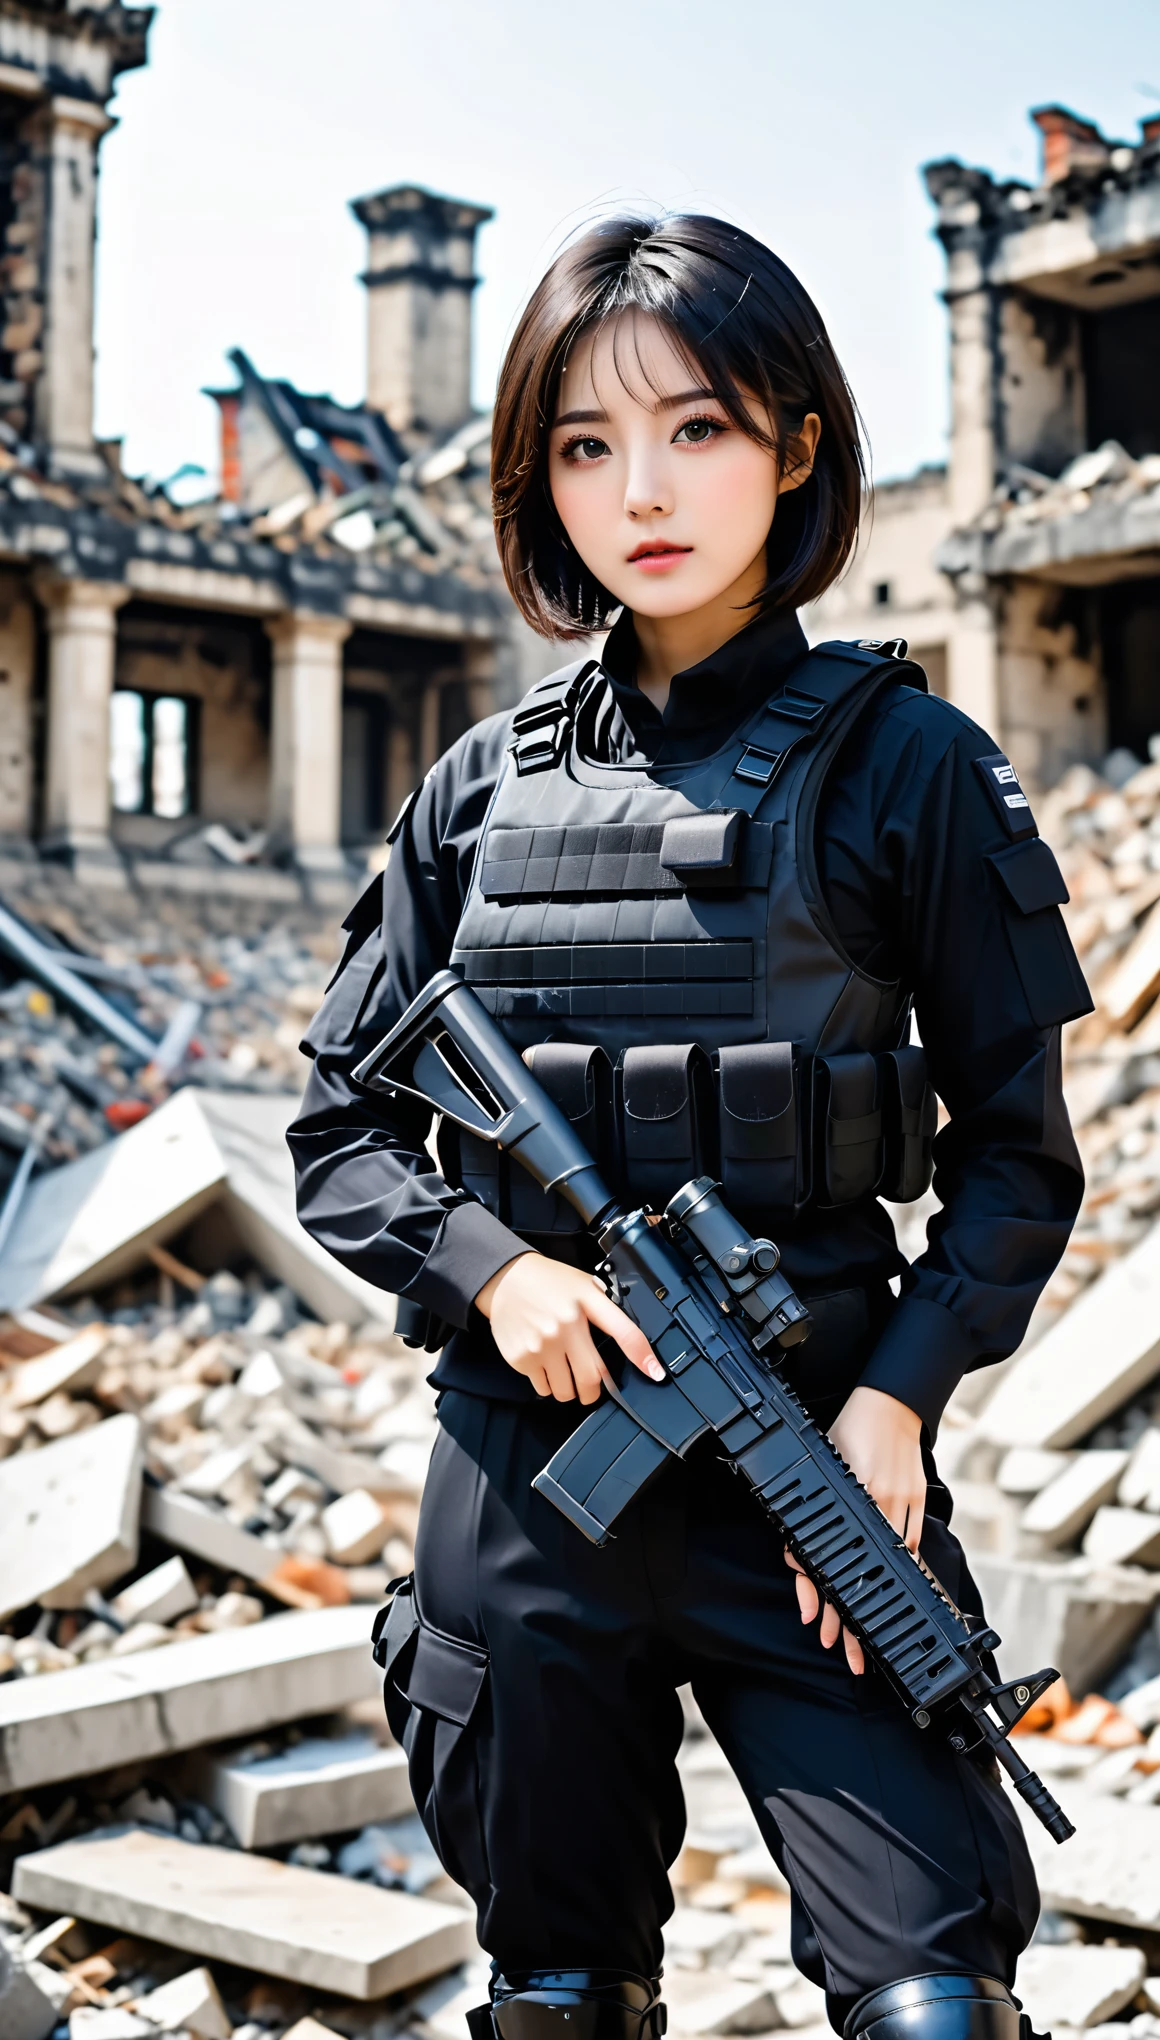 ((masterpiece)),((highest quality)),((High resolution)),((Very detailed)),Female,25 years old,Woman,Japanese,Dark hair,Short bob,Beautiful eyes,Long eyelashes, Beautiful hair, beautiful skin, serious, BREAK (((pointed gun))), handgun, SWAT Uniforms,black bulletproof vest combat boots, black tactical Forster, tactical helmet, (the background is the rubble of the ruins), (( (Background blur)))